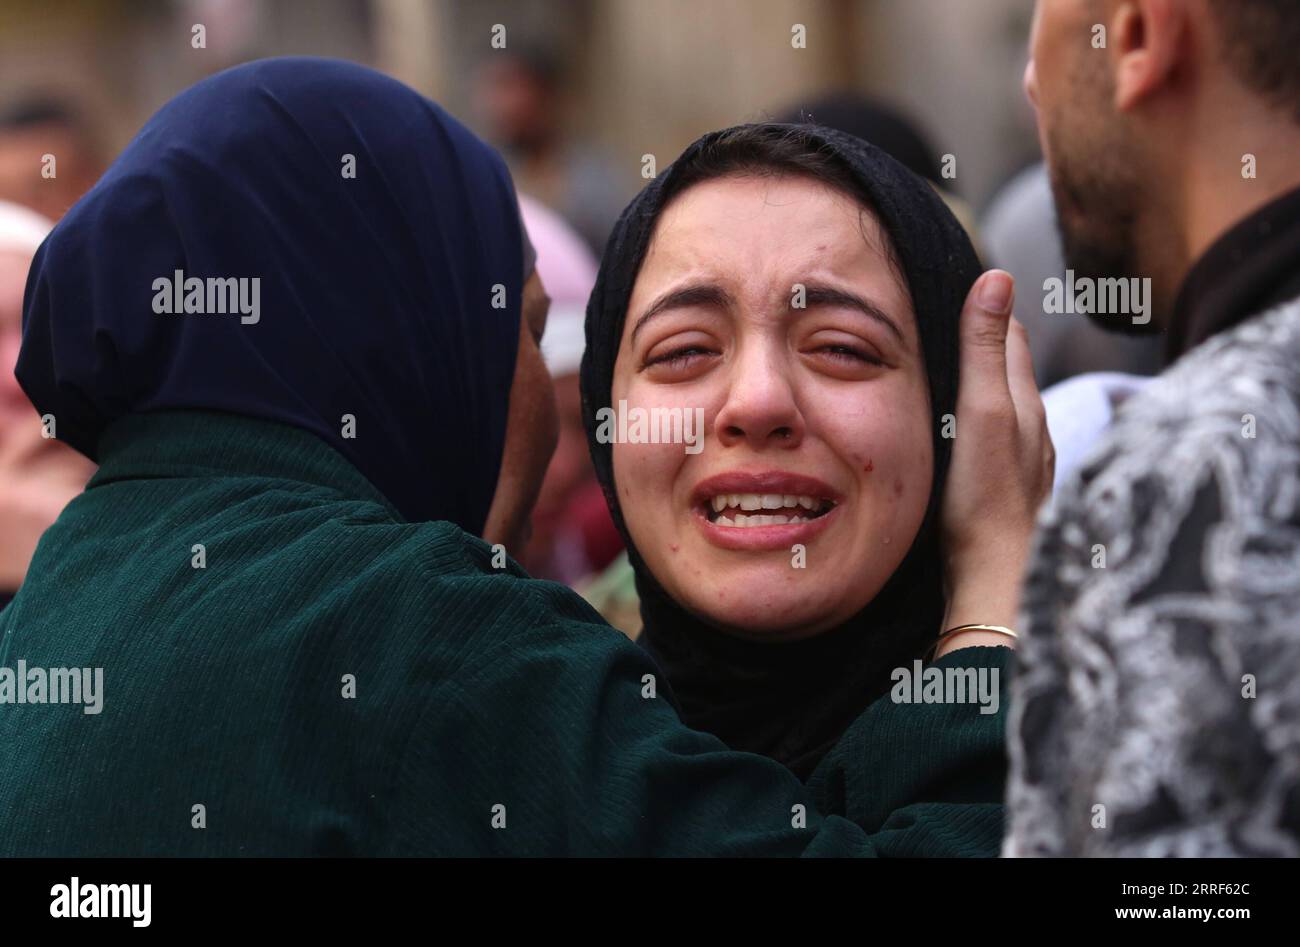 220331 -- JENIN, March 31, 2022 -- A woman mourns during the funeral of victims killed during clashes with Israeli soldiers in the West Bank city of Jenin, March 31, 2022. The Palestinian Health Ministry said that Yazeed al-Sa di, 27, and Sanad Abu Atteya, 17, were killed on Thursday during clashes with Israeli soldiers in the northern West Bank city of Jenin. Photo by /Xinhua MIDEAST-JENIN-FUNERAL NidalxEshtayeh PUBLICATIONxNOTxINxCHN Stock Photo